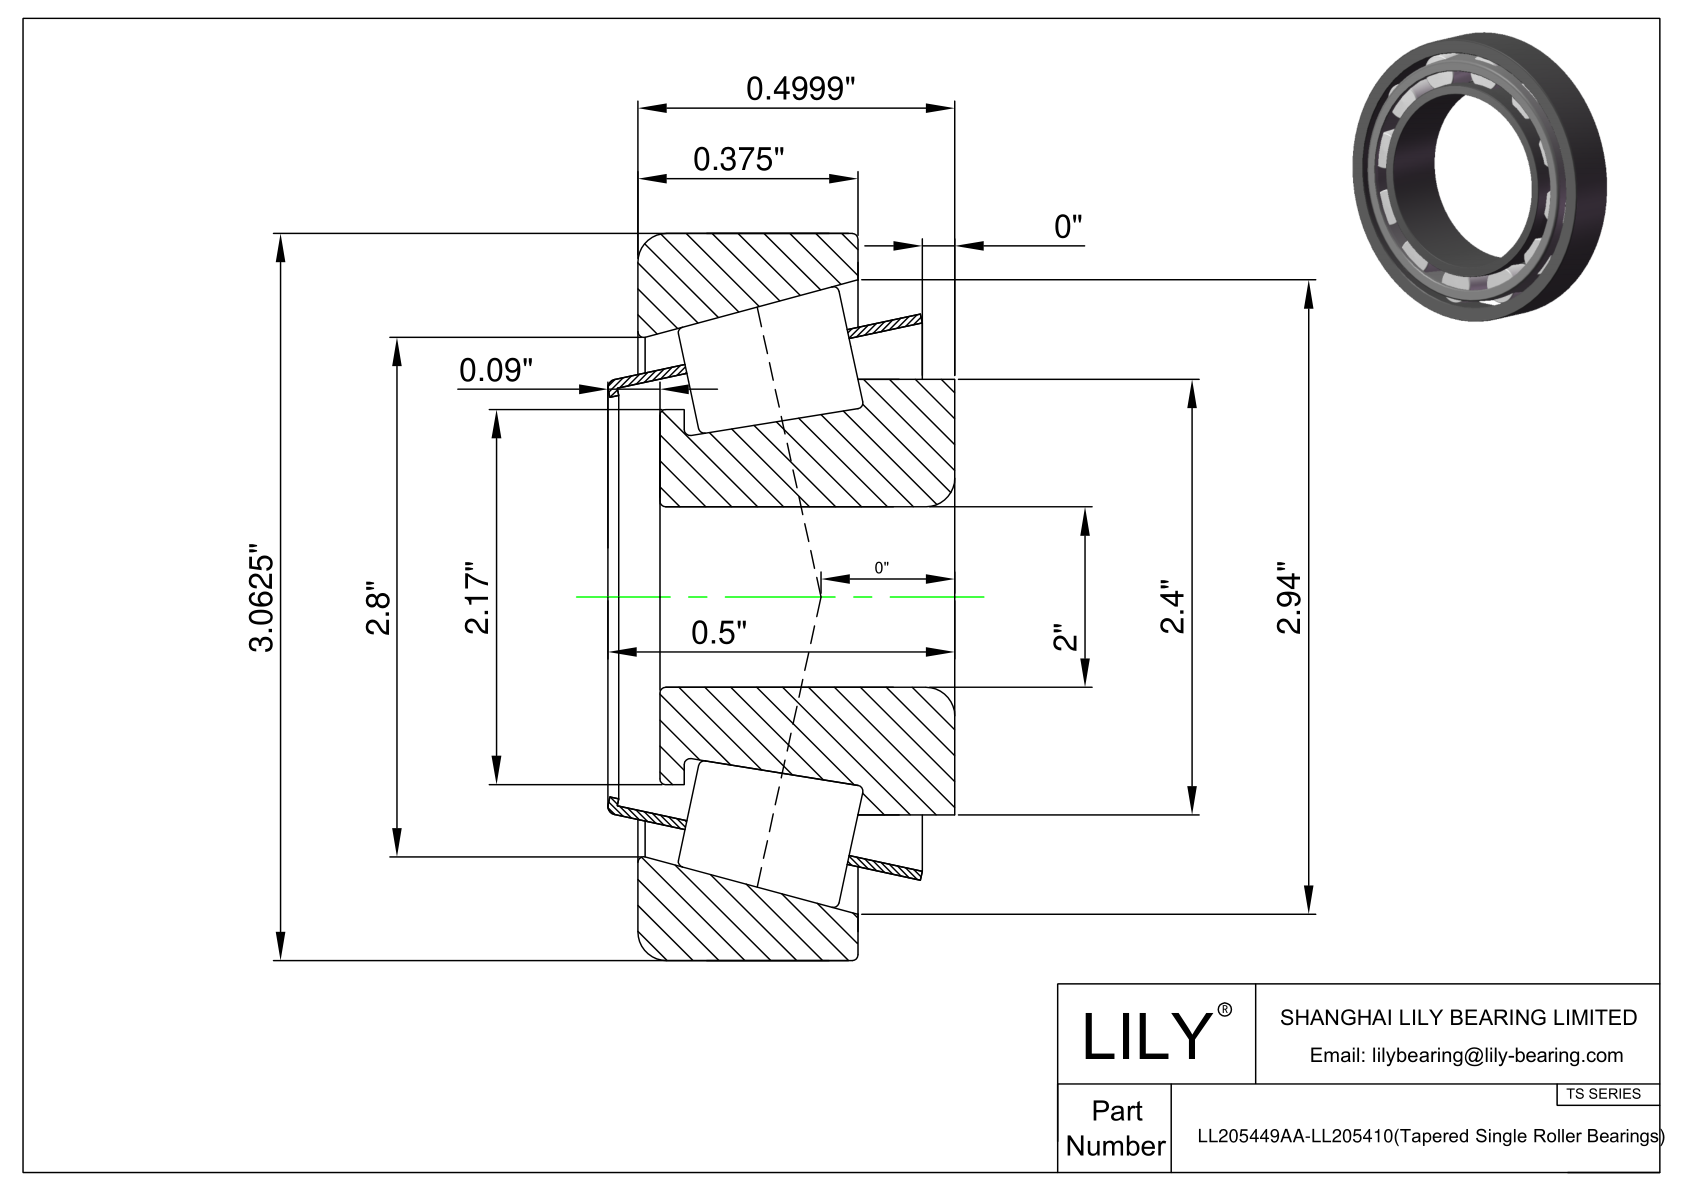 LL205449AA-LL205410 TS (Tapered Single Roller Bearings) (Imperial) cad drawing